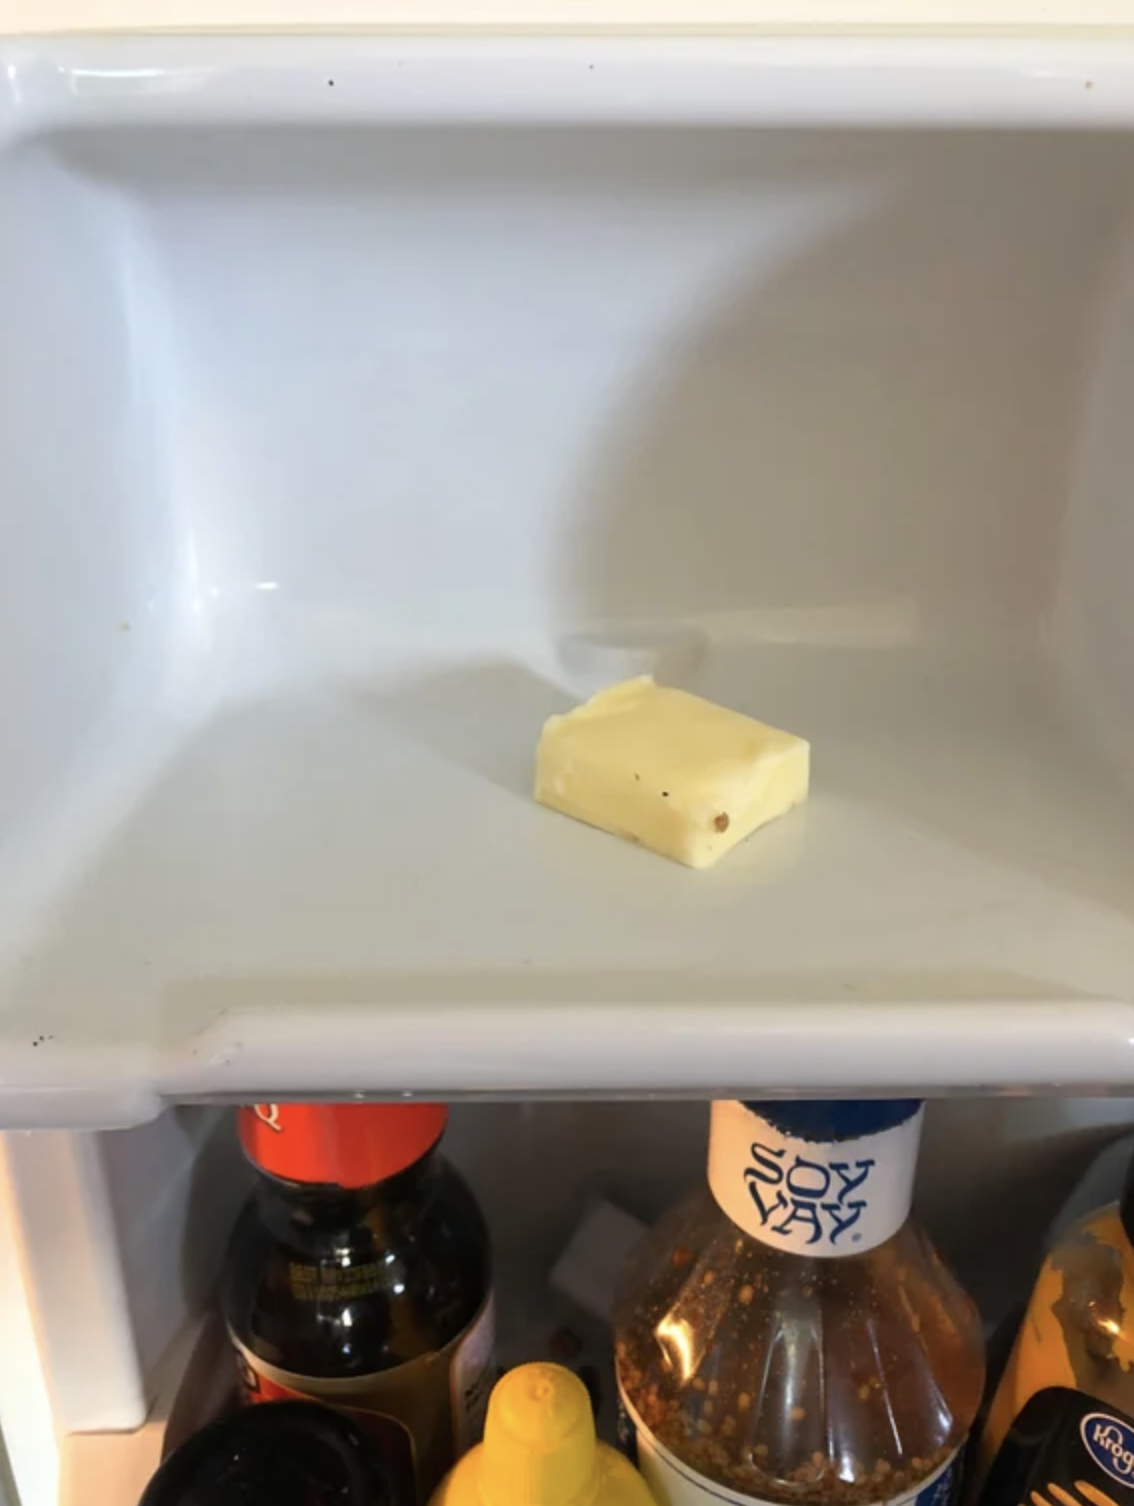 There is some butter in the fridge